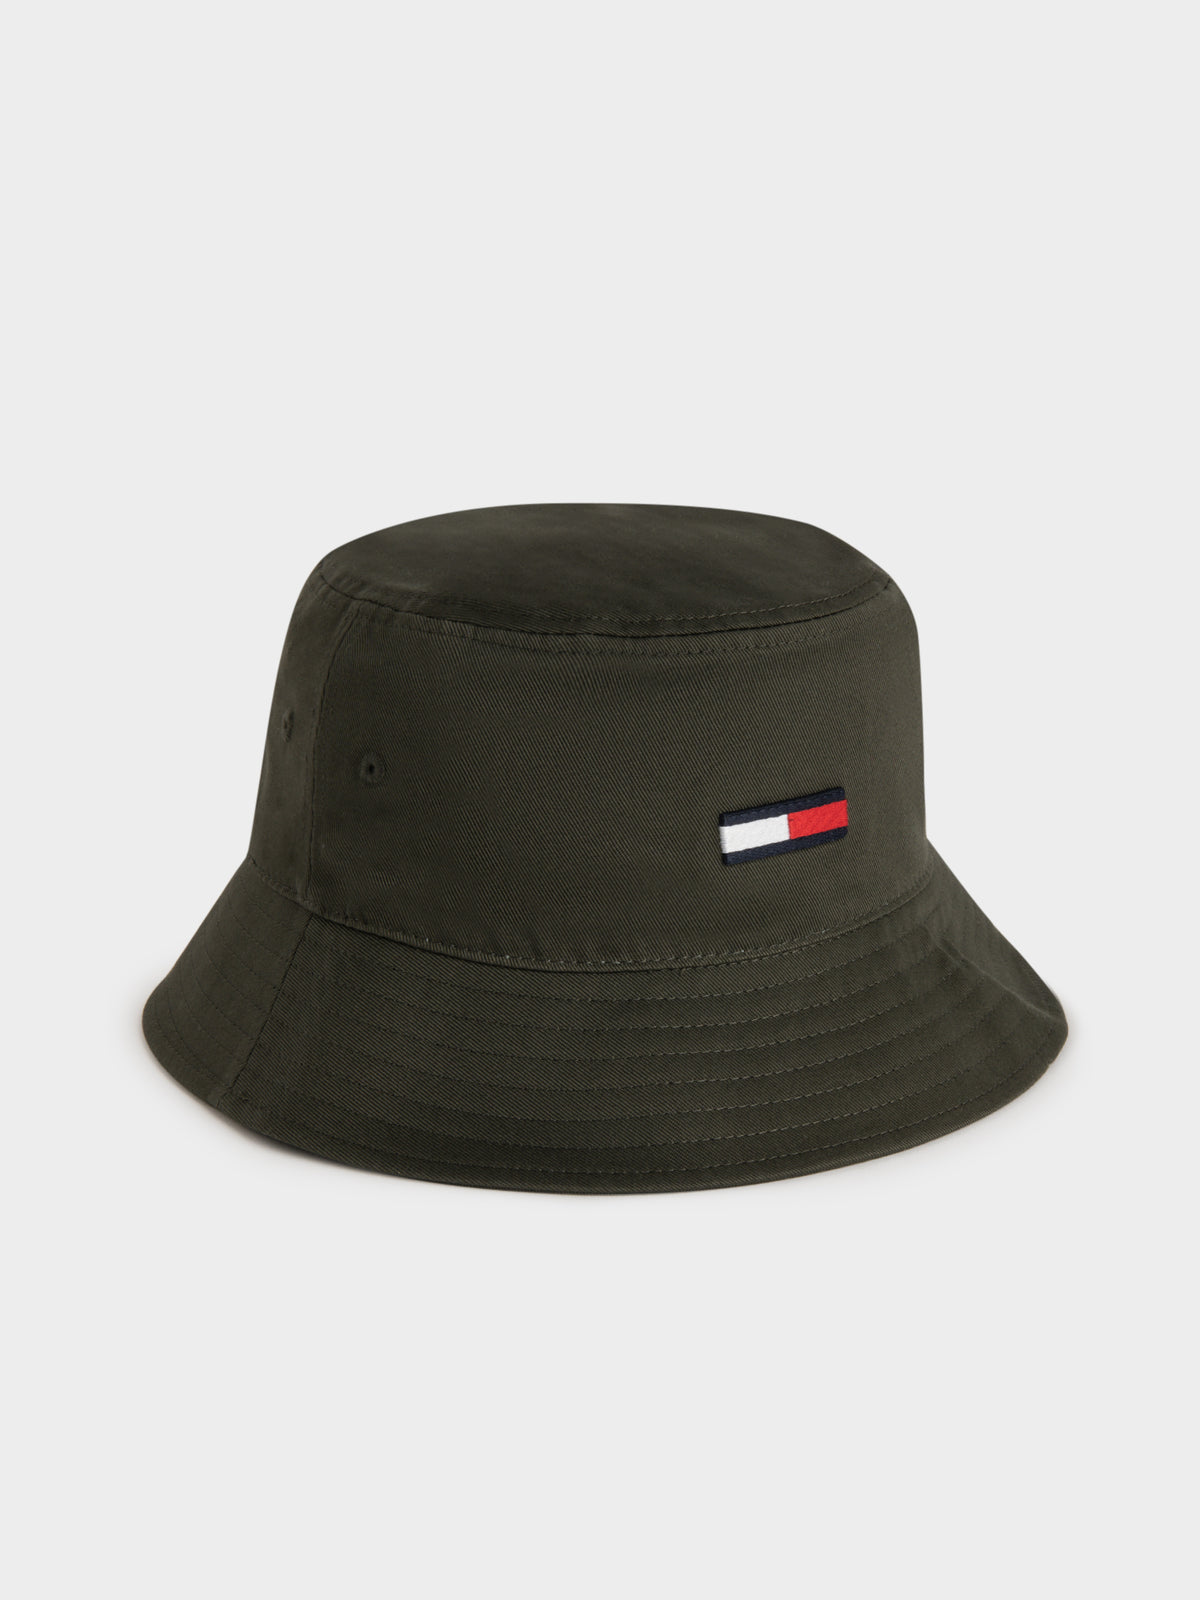 Flag Embroidered Cotton Bucket Hat in Olive